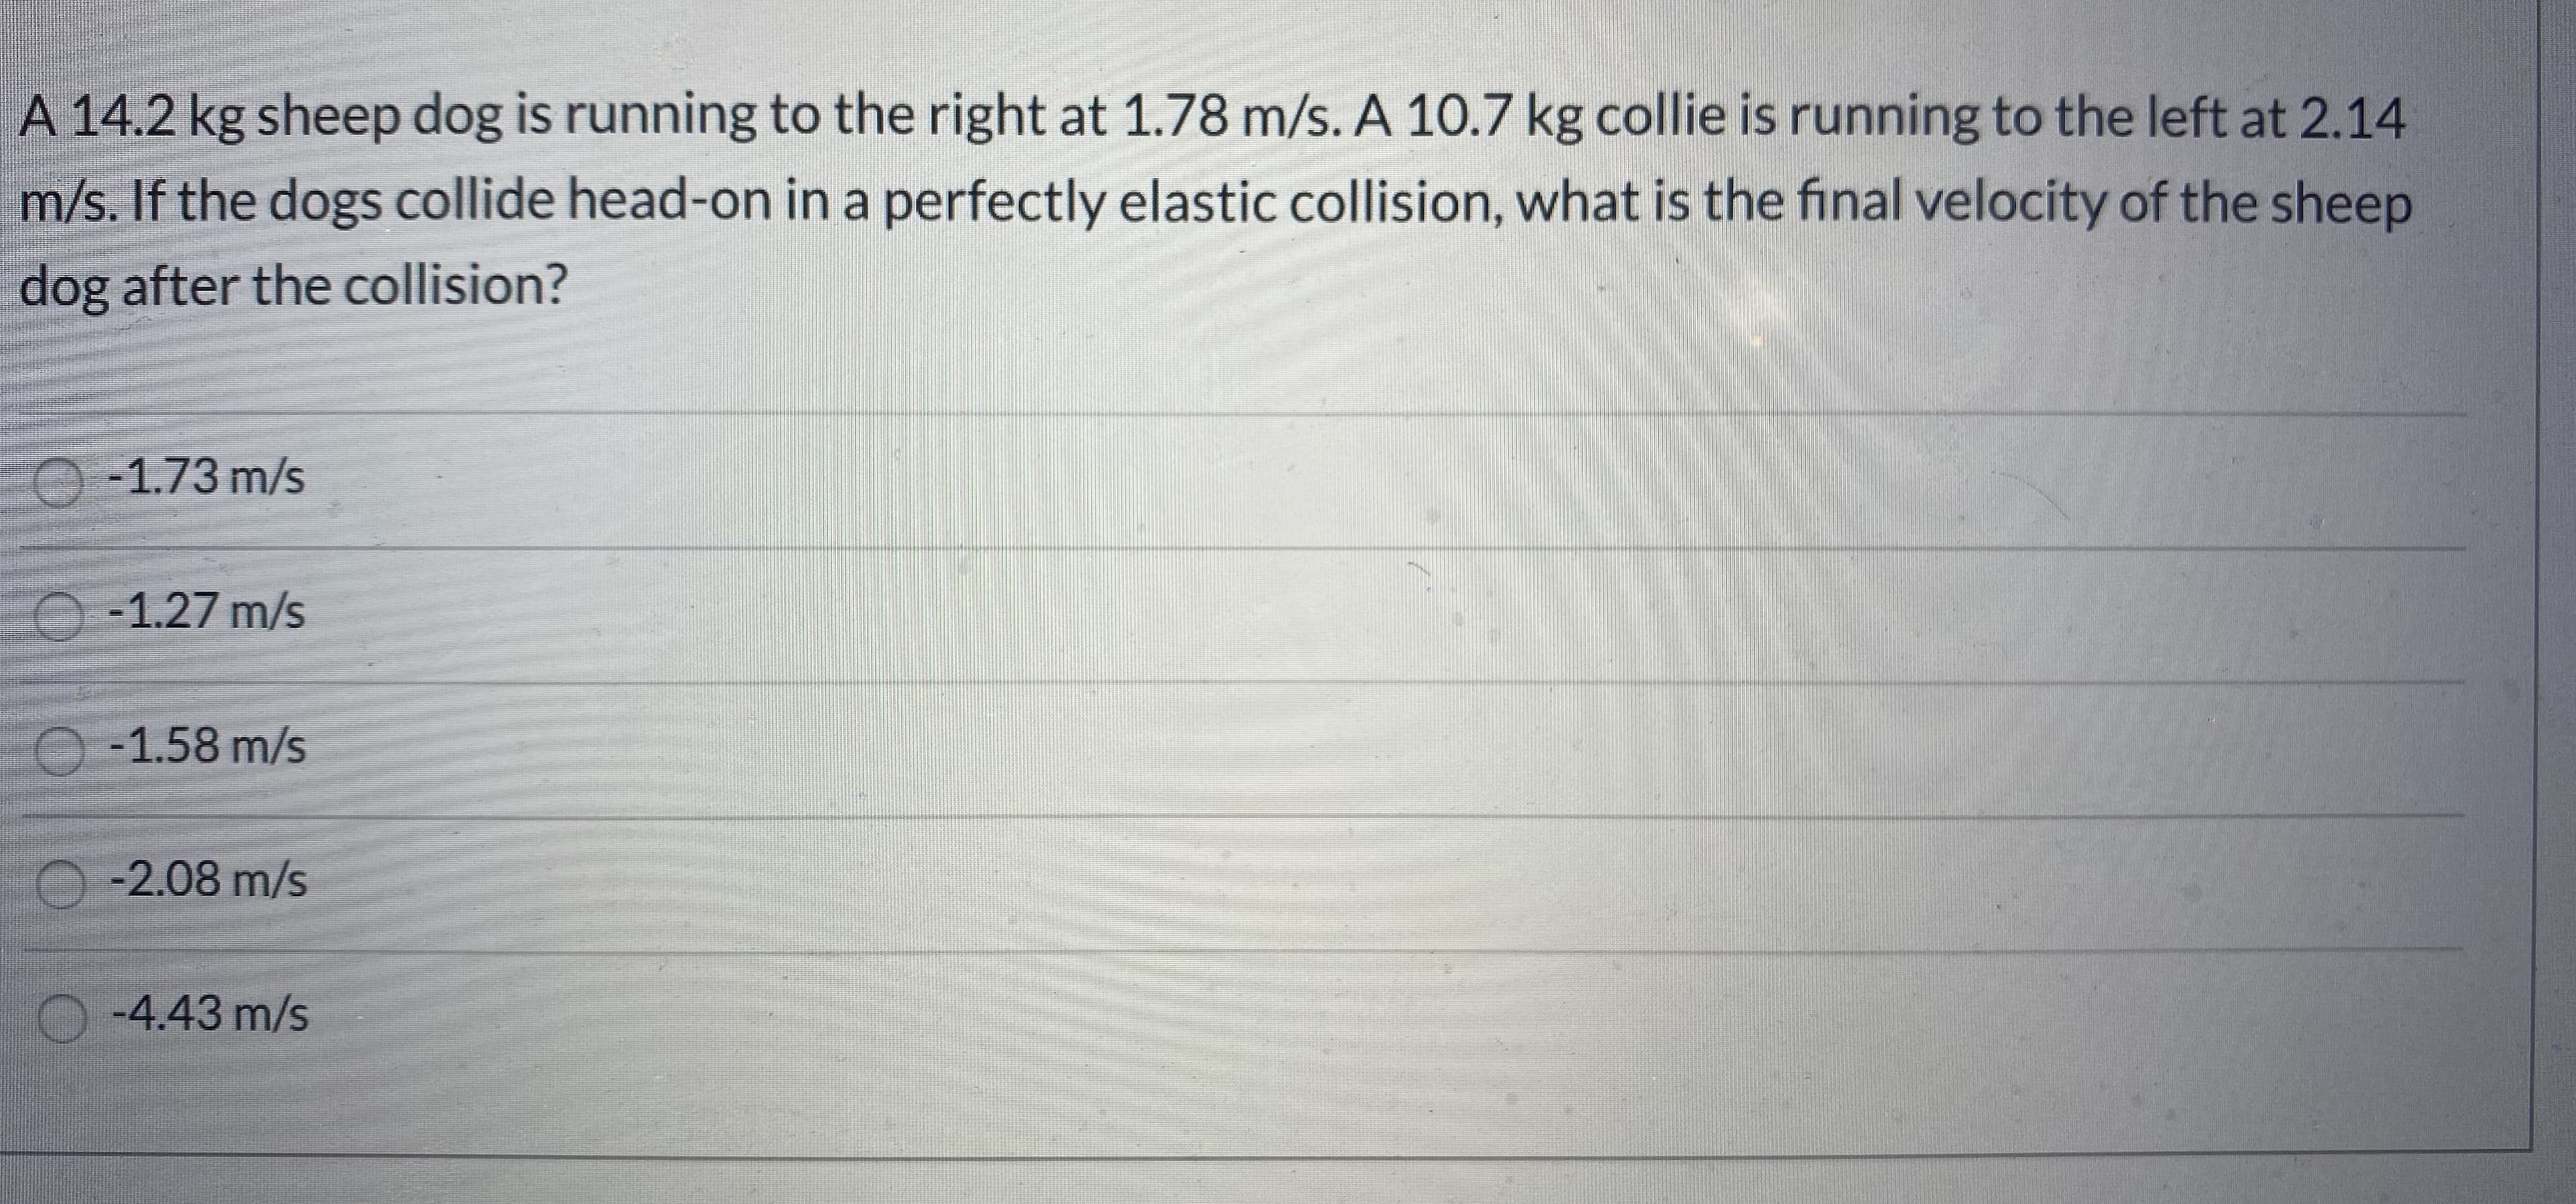 A 14.2 kg sheep dog is running to the right at 1.78 m/s. A 10.7 kg collie is running to the left at 2.14
m/s. If the dogs collide head-on in a perfectly elastic collision, what is the final velocity of the sheep
dog after the collision?
